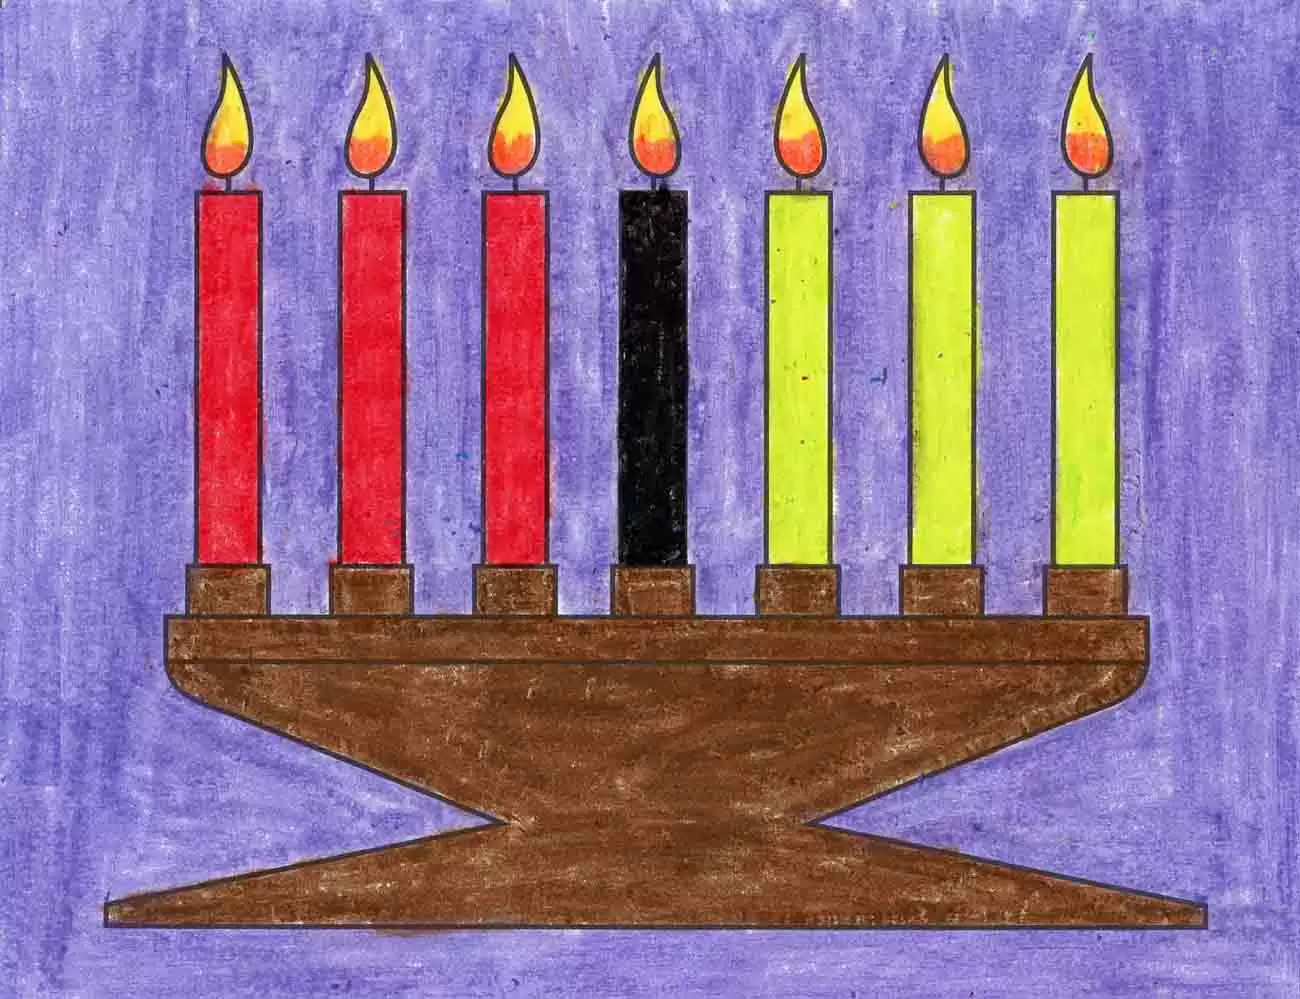 Easy How to Draw Kwanzaa Candles Tutorial and Kwanzaa Candles Coloring Page